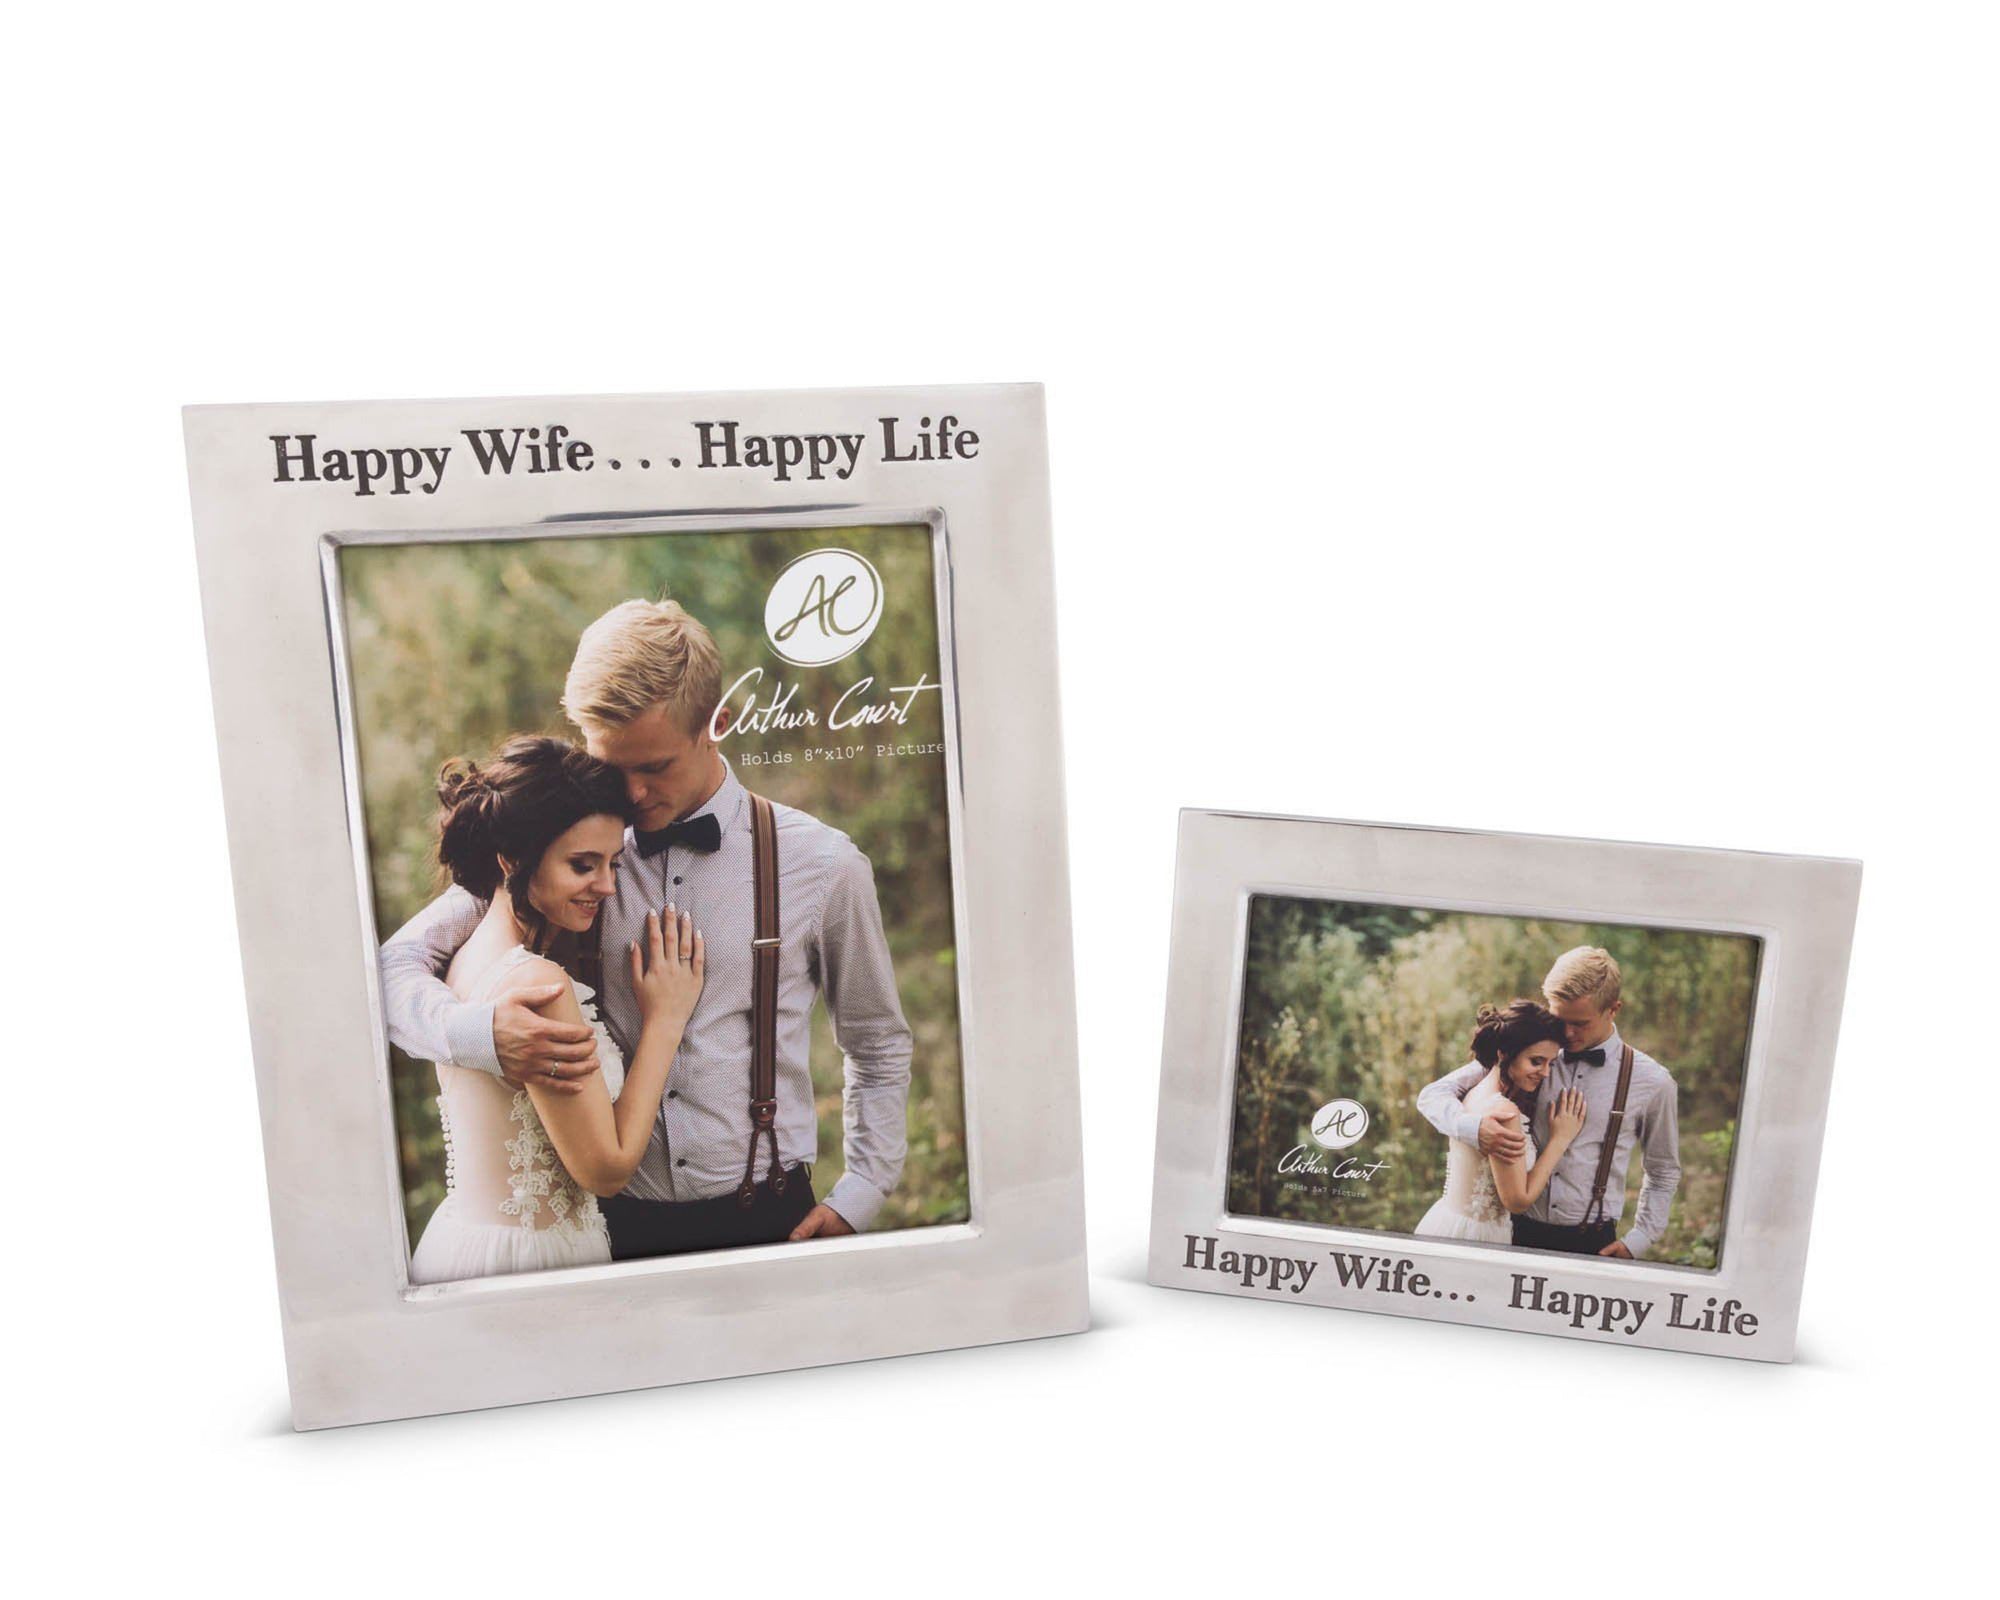 Polished Aluminum 'Happy Wife Happy Life' Picture Frame by Arthur Court Designs 5 x 7 Photo Frame - Perfect wedding gift / Valentine frame